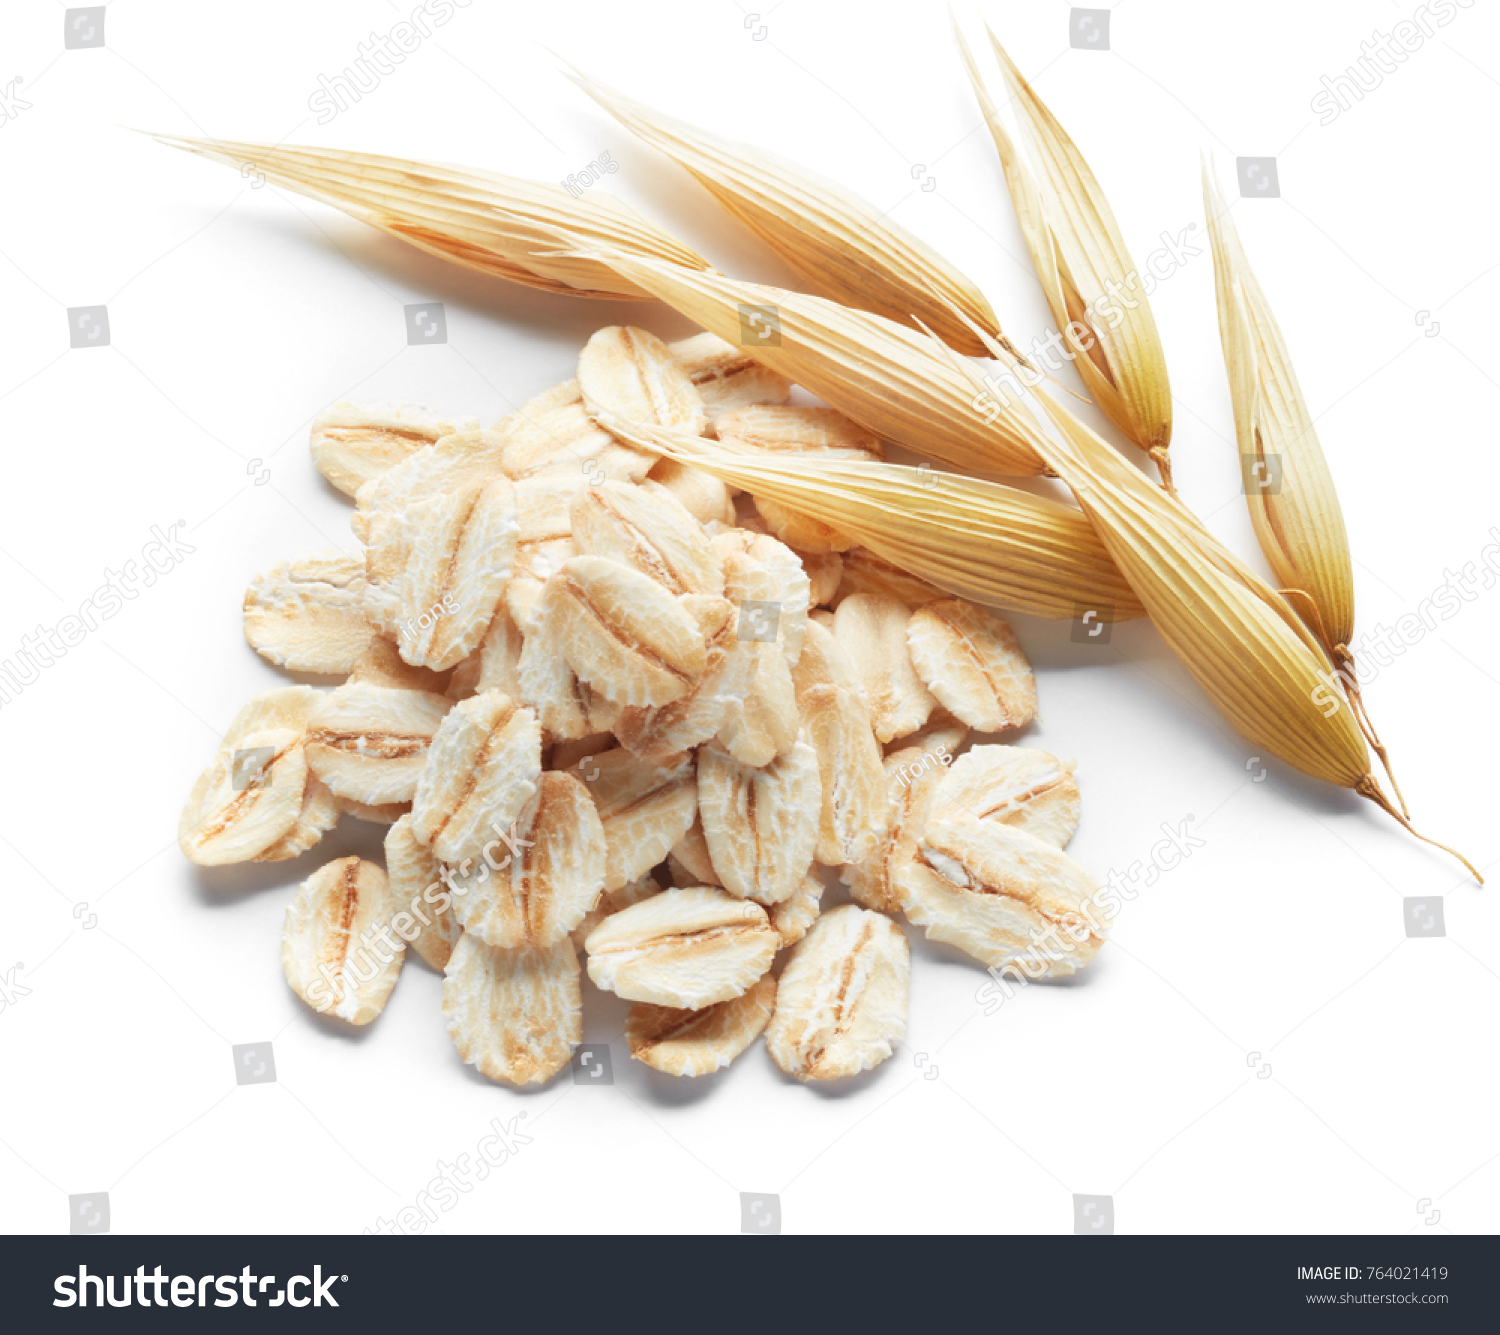 oatmeal and its crops isolated on white #764021419